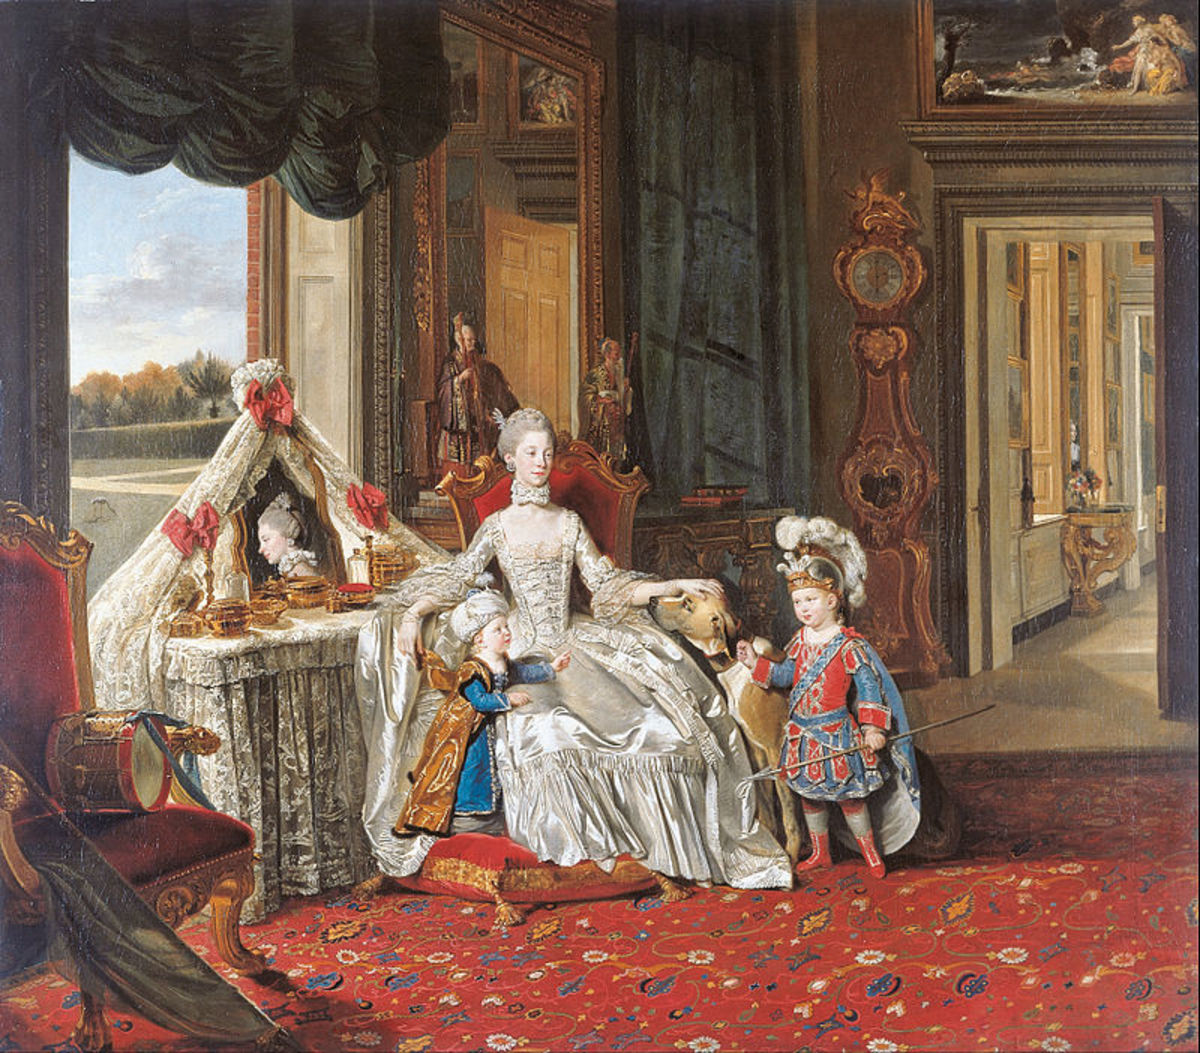 Johan Zoffany's 1765 portrait of Queen Charlotte with Princes George and Frederick.